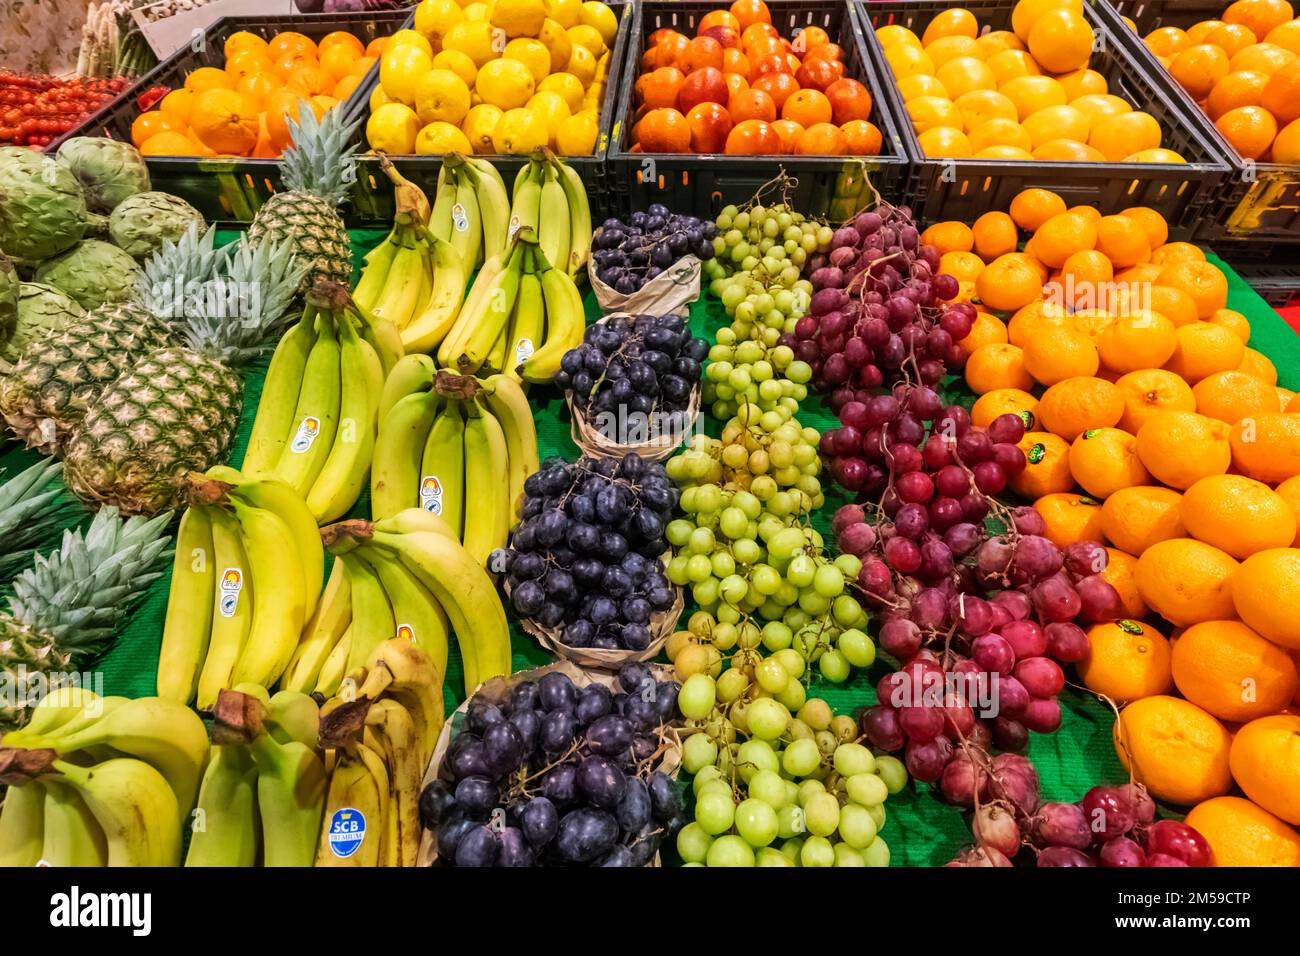 France, French Riviera, Cote d'Azur, Cannes, Forville Market, Fruit Stall Display *** Local Caption ***  Europe,France,French Riviera,Cote d'Azur,Prov Stock Photo